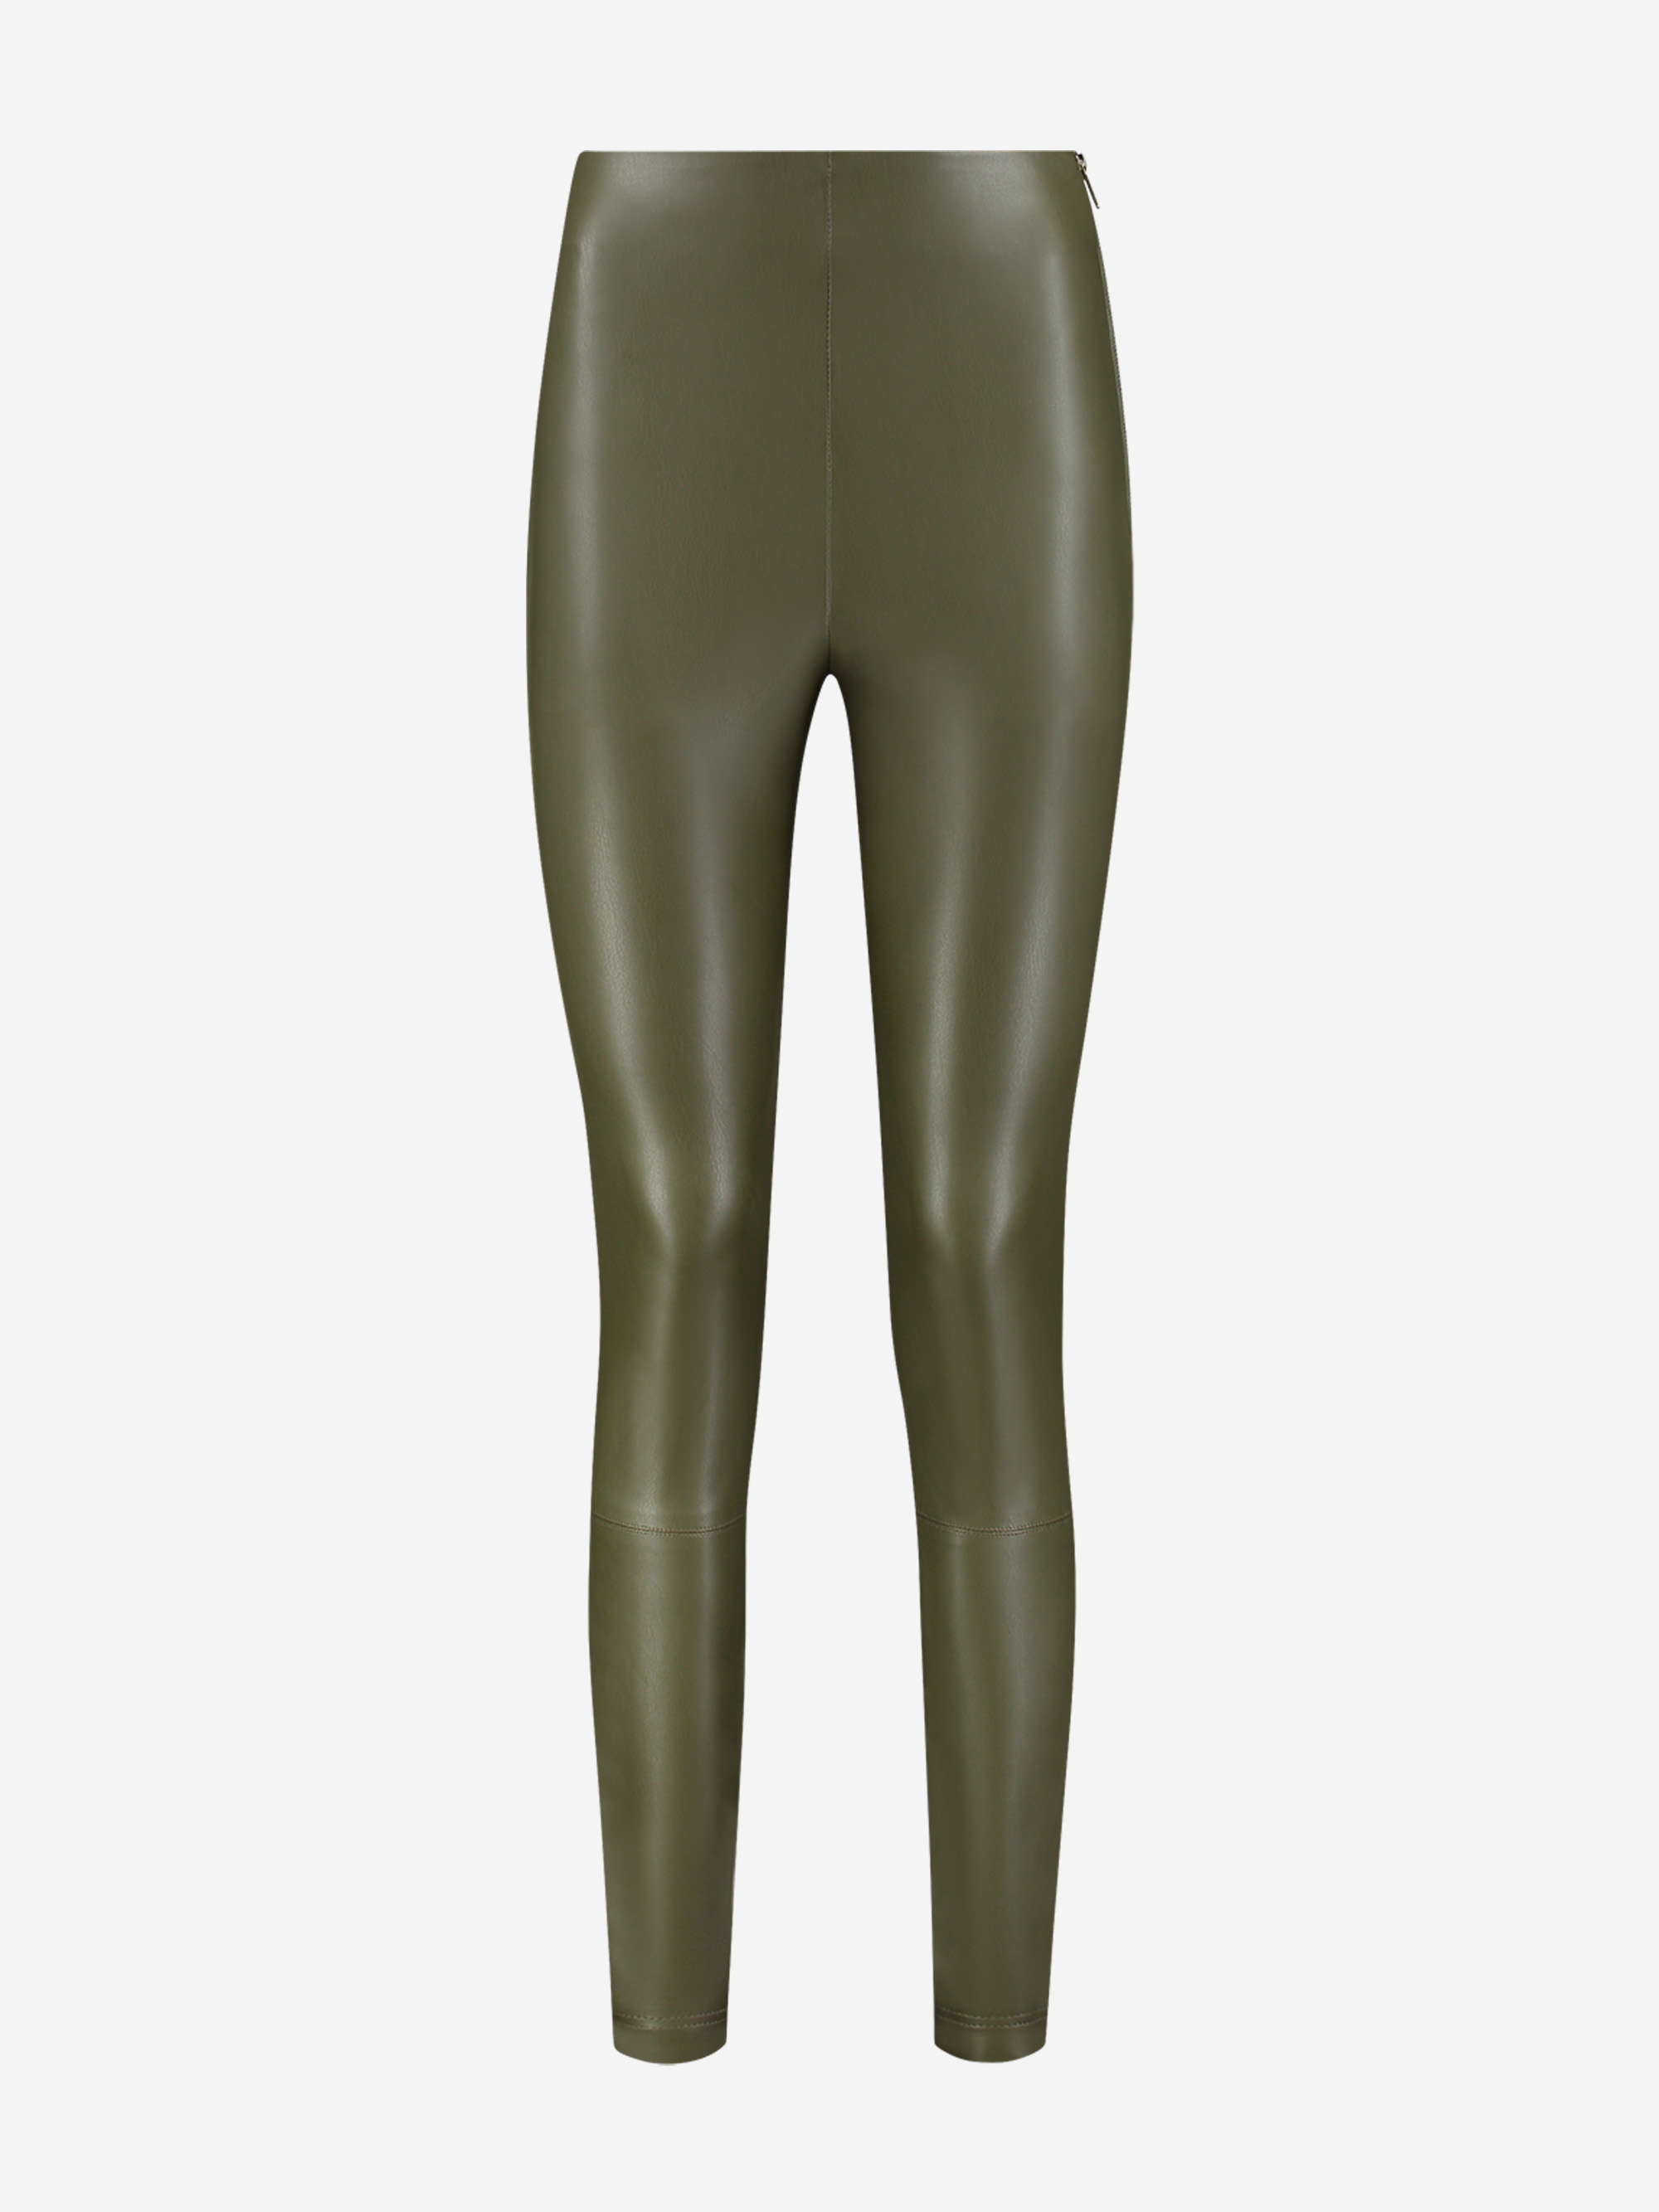 Vegan leather pants with high rise